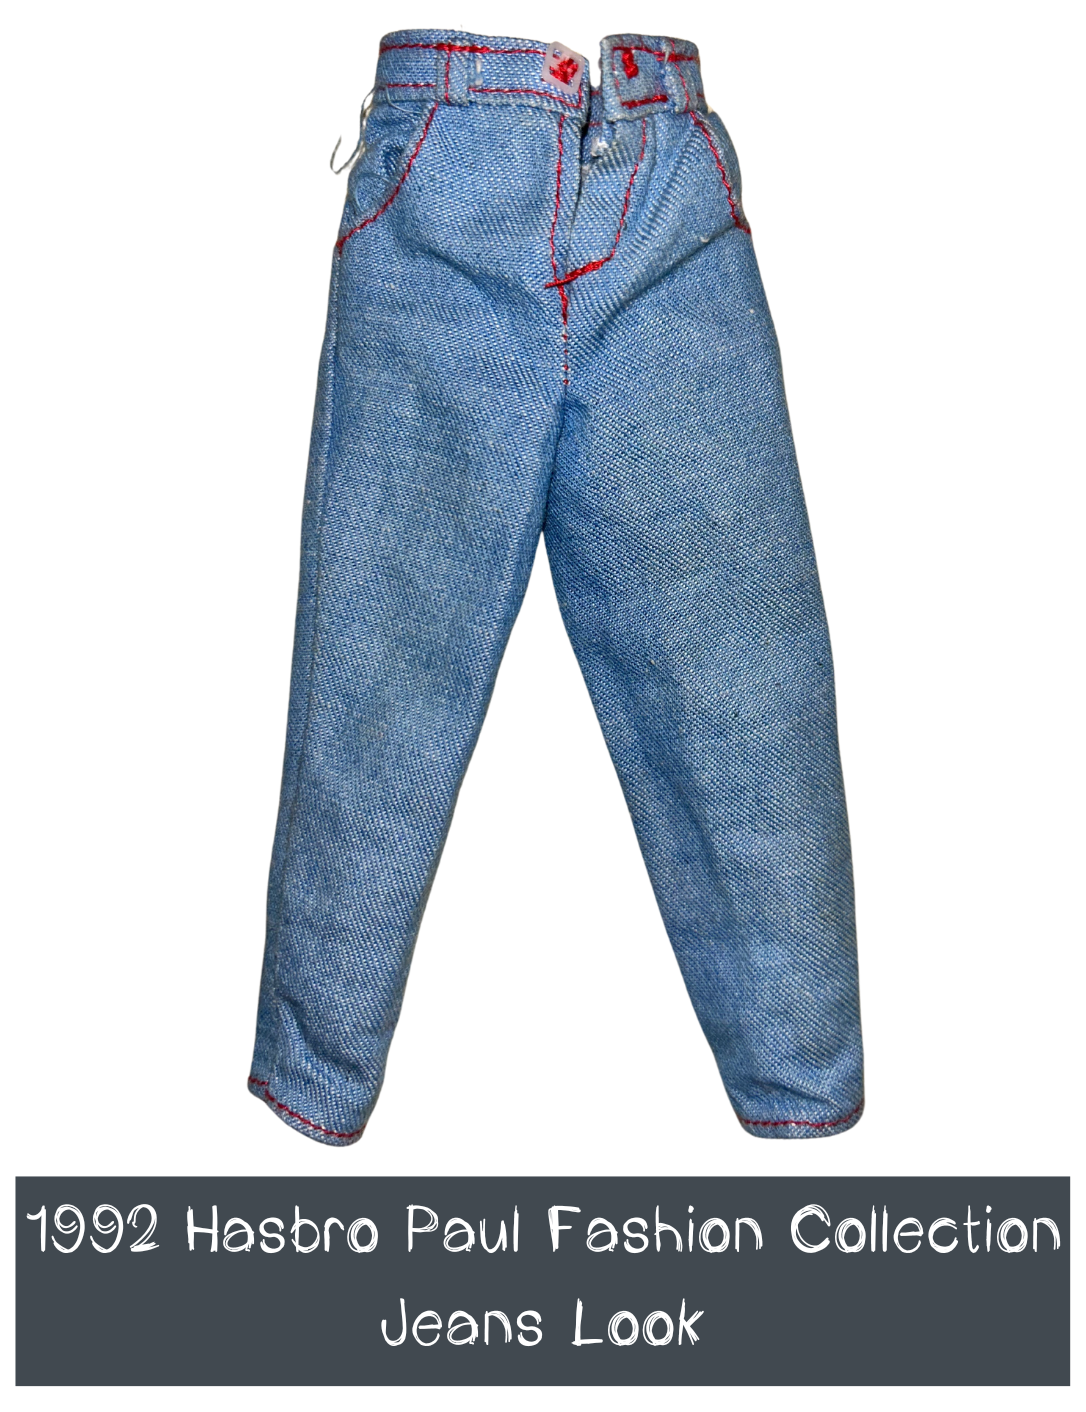 1992 Hasbro Paul Fashion Collection Jeans Look